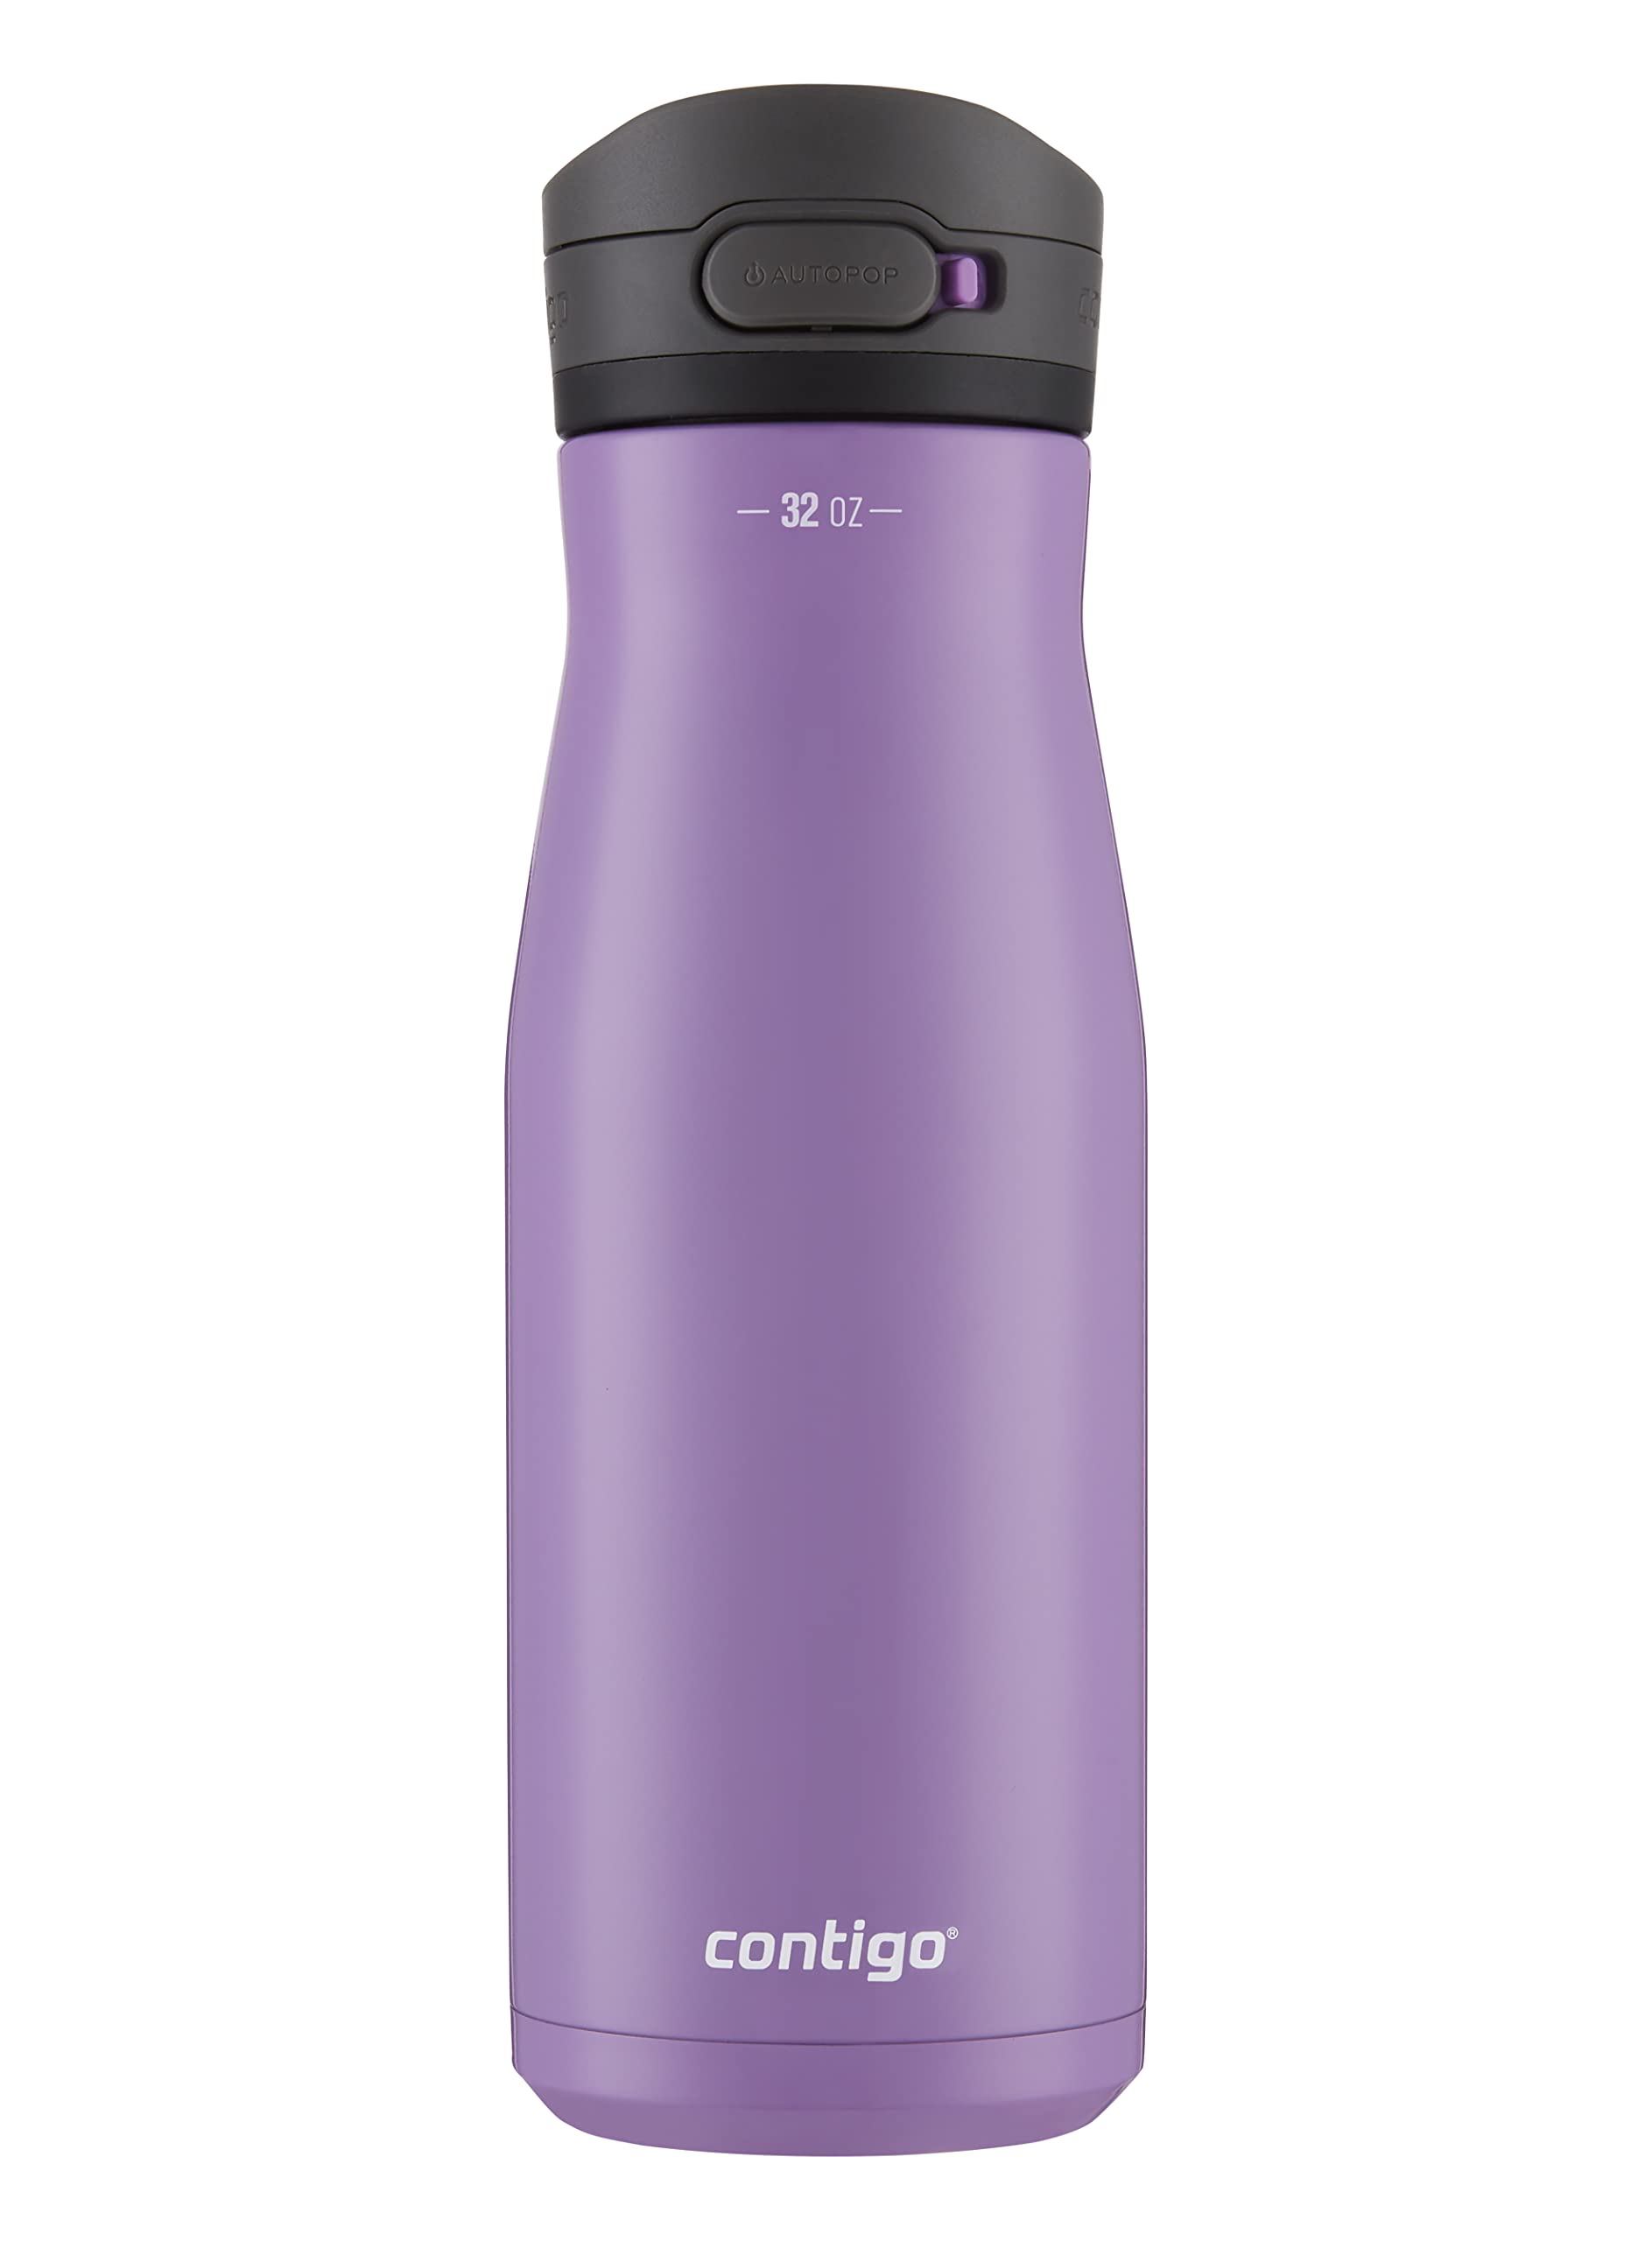 32-Oz Contigo Jackson Chill 2.0 Vacuum-Insulated Stainless Steel Water Bottle $17 + Free Shipping w/ Prime or on $35+